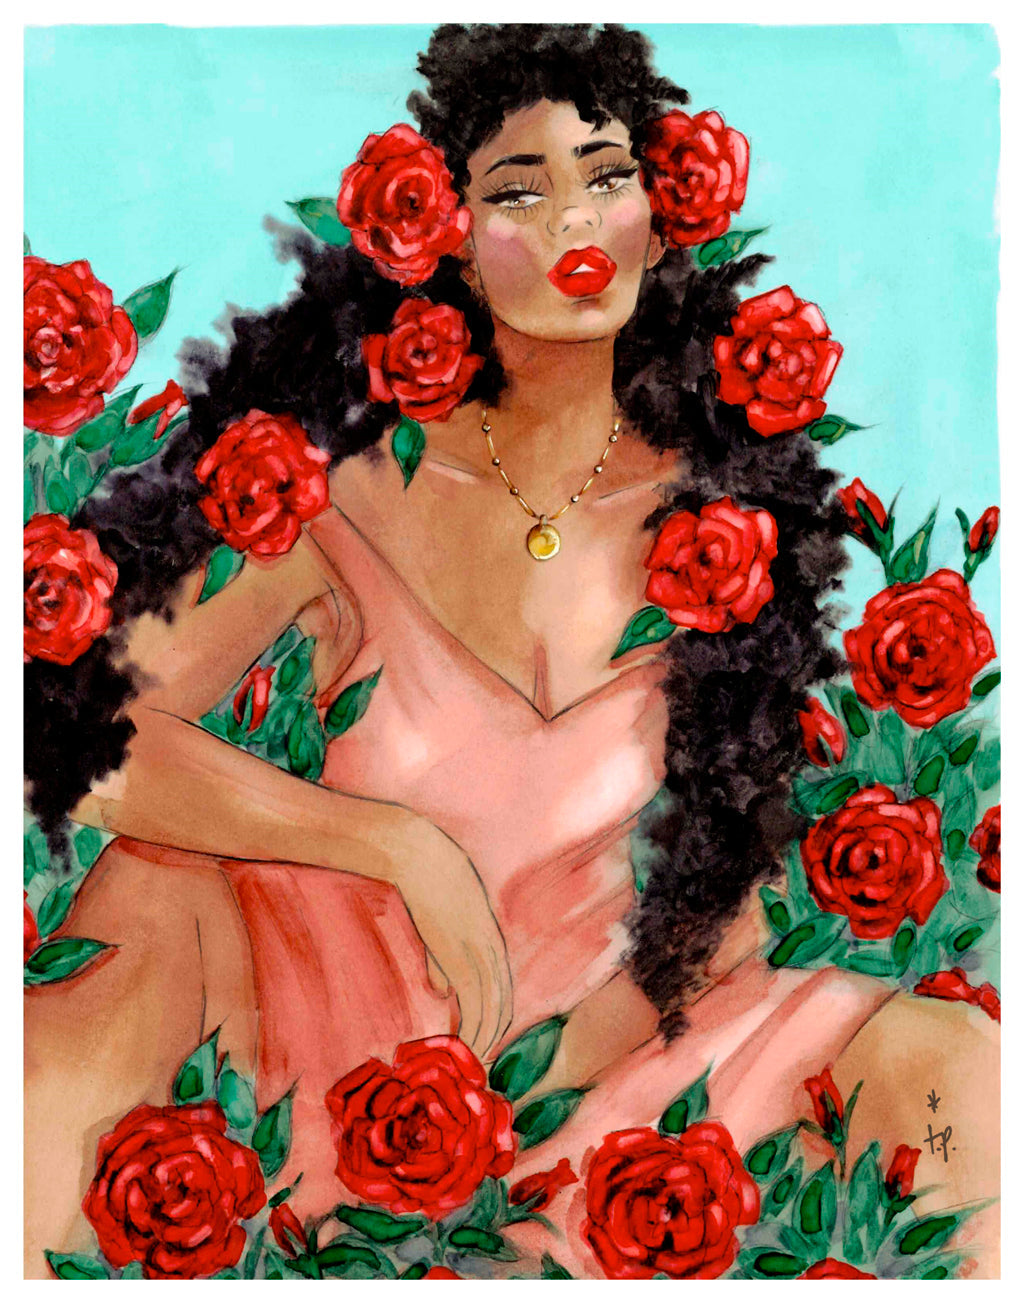 Marker illustration of a woman with red roses in her hair sitting in a bush of red roses by Tatiana Poblah